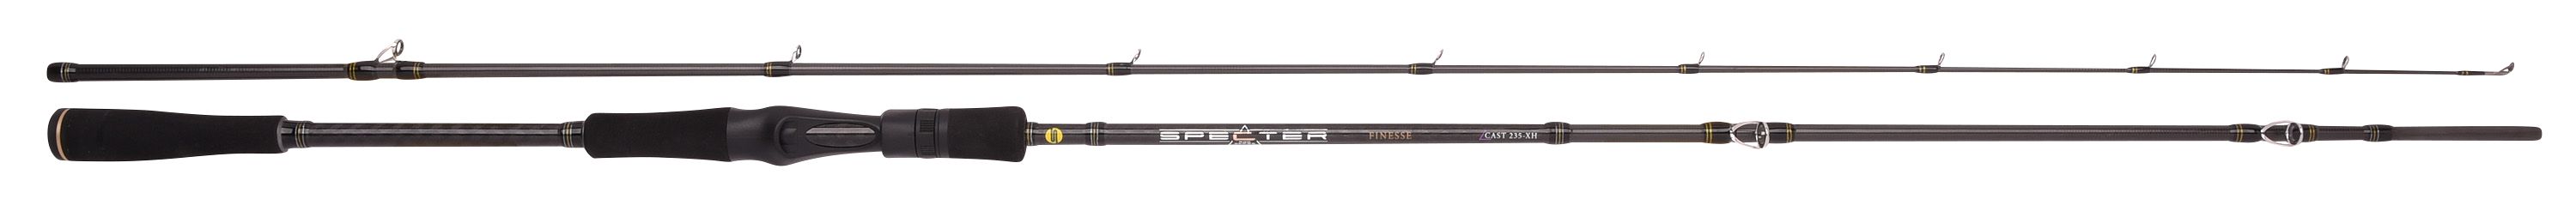 Spro Specter Finesse Casting rods